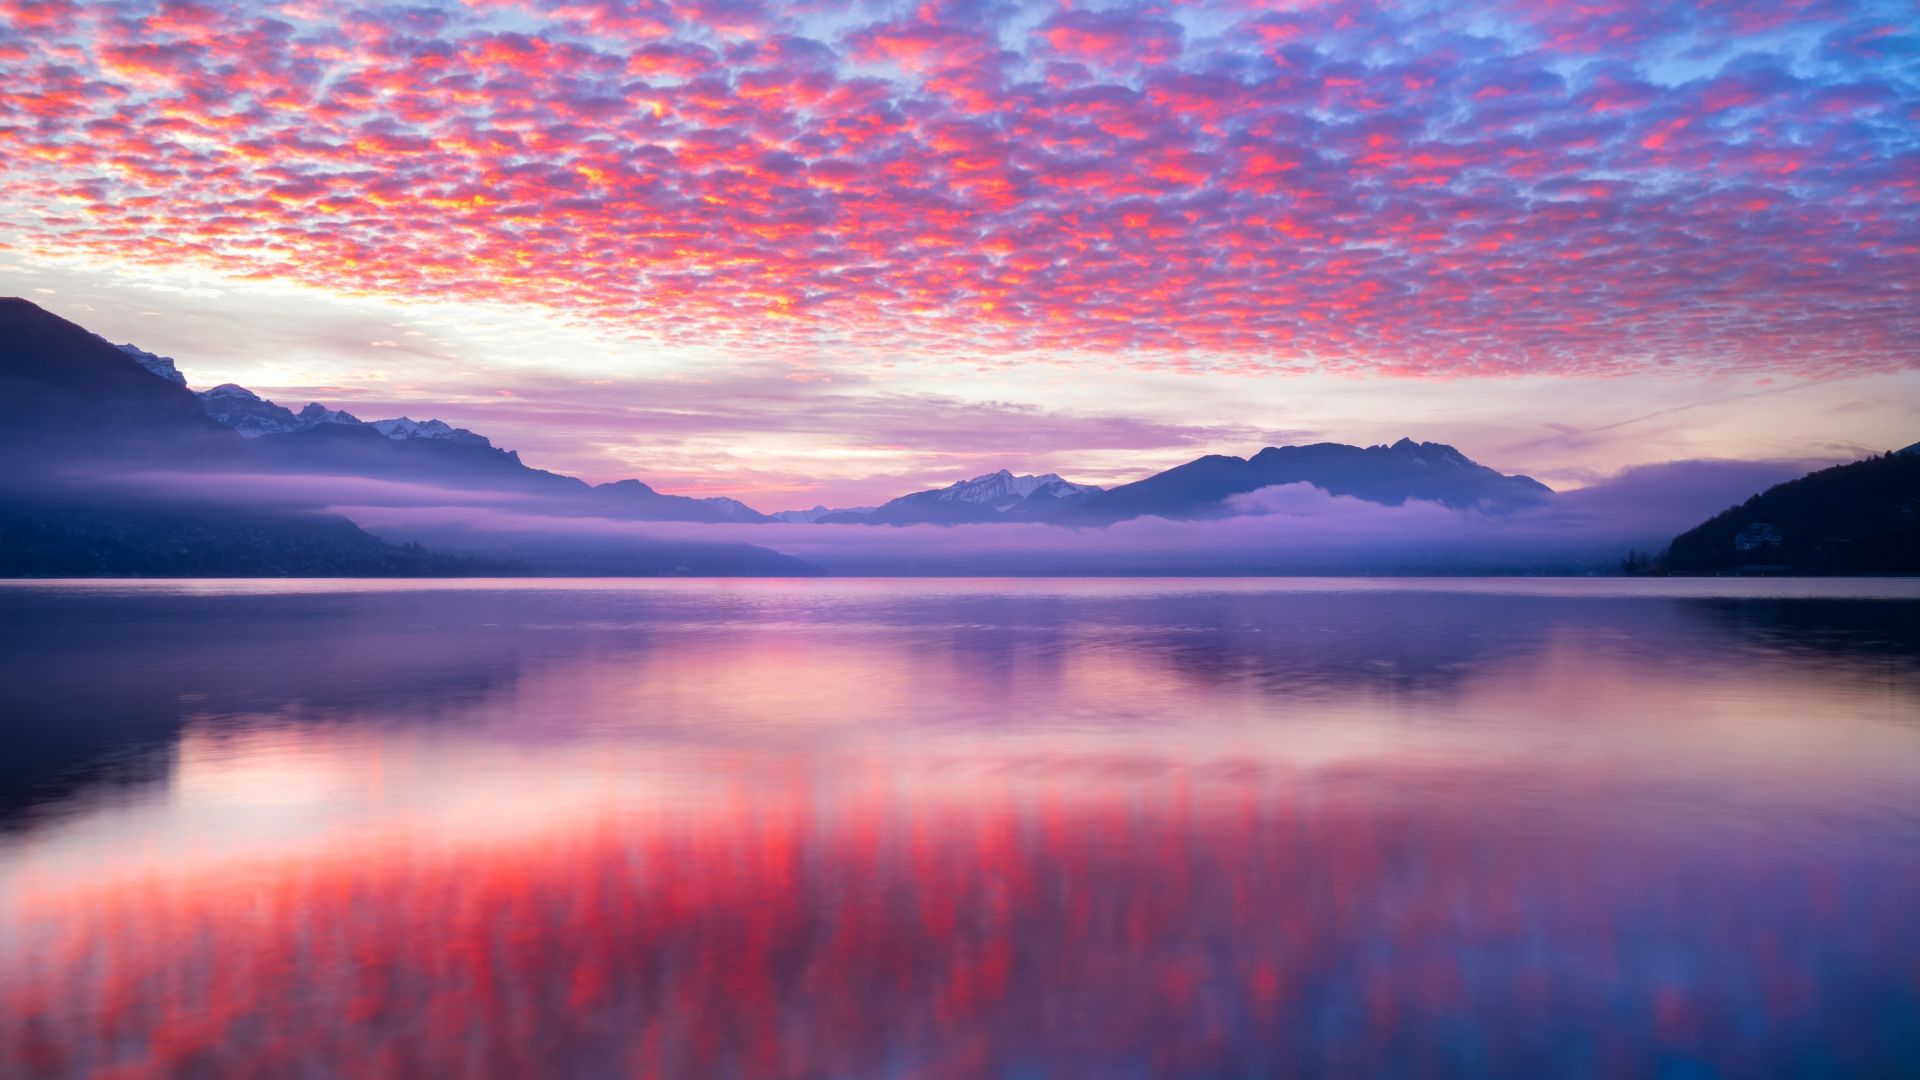 Desktop wallpaper mountains, pink clouds, reflections, lake, HD image, picture, background, 7ea02c